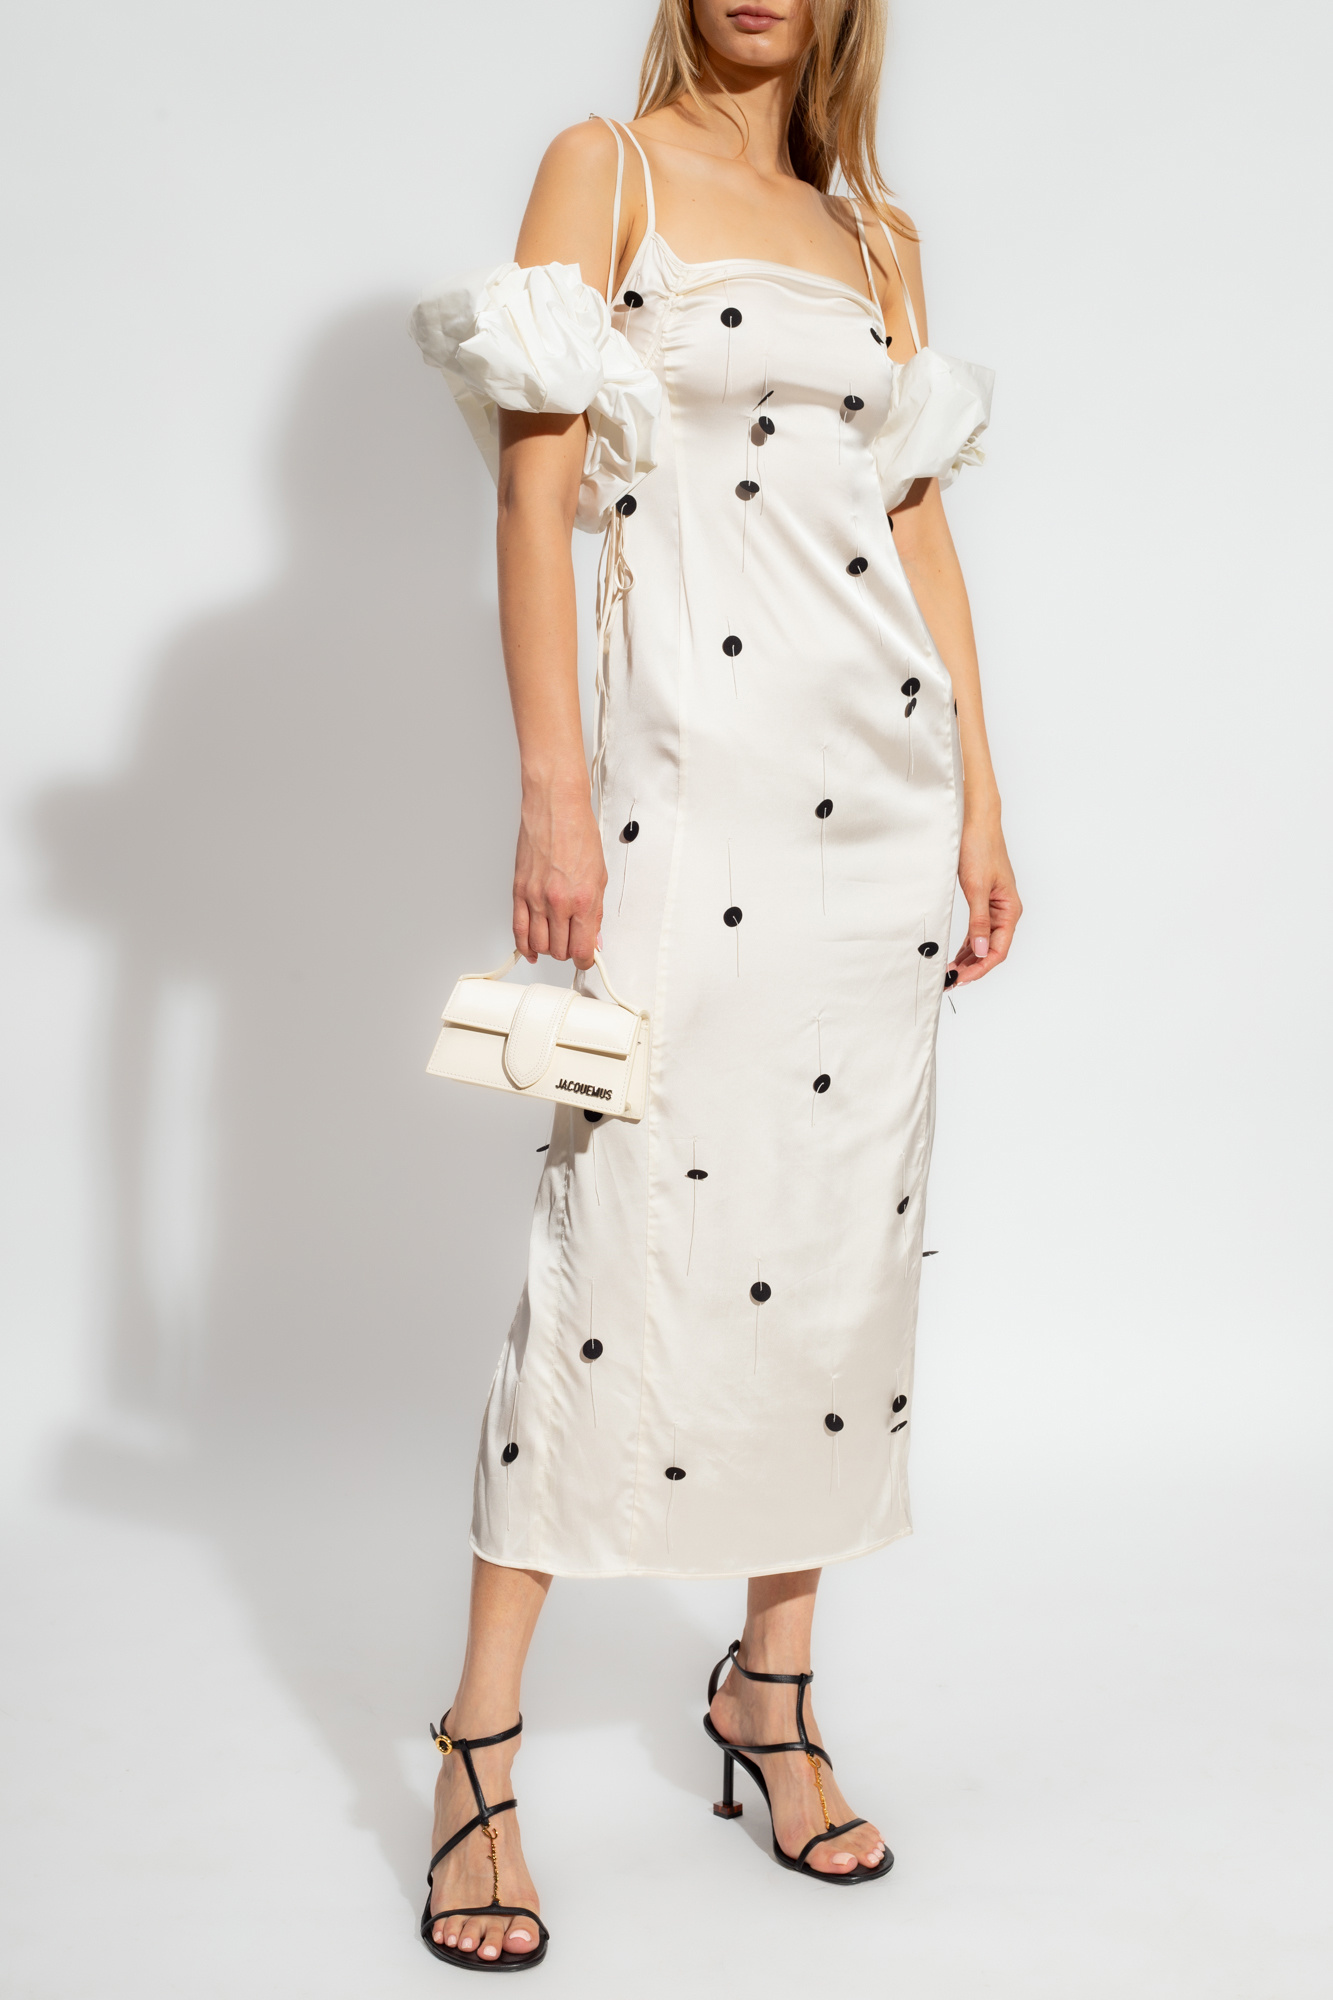 Jacquemus ‘Chouchou’ dress with detachable sleeves